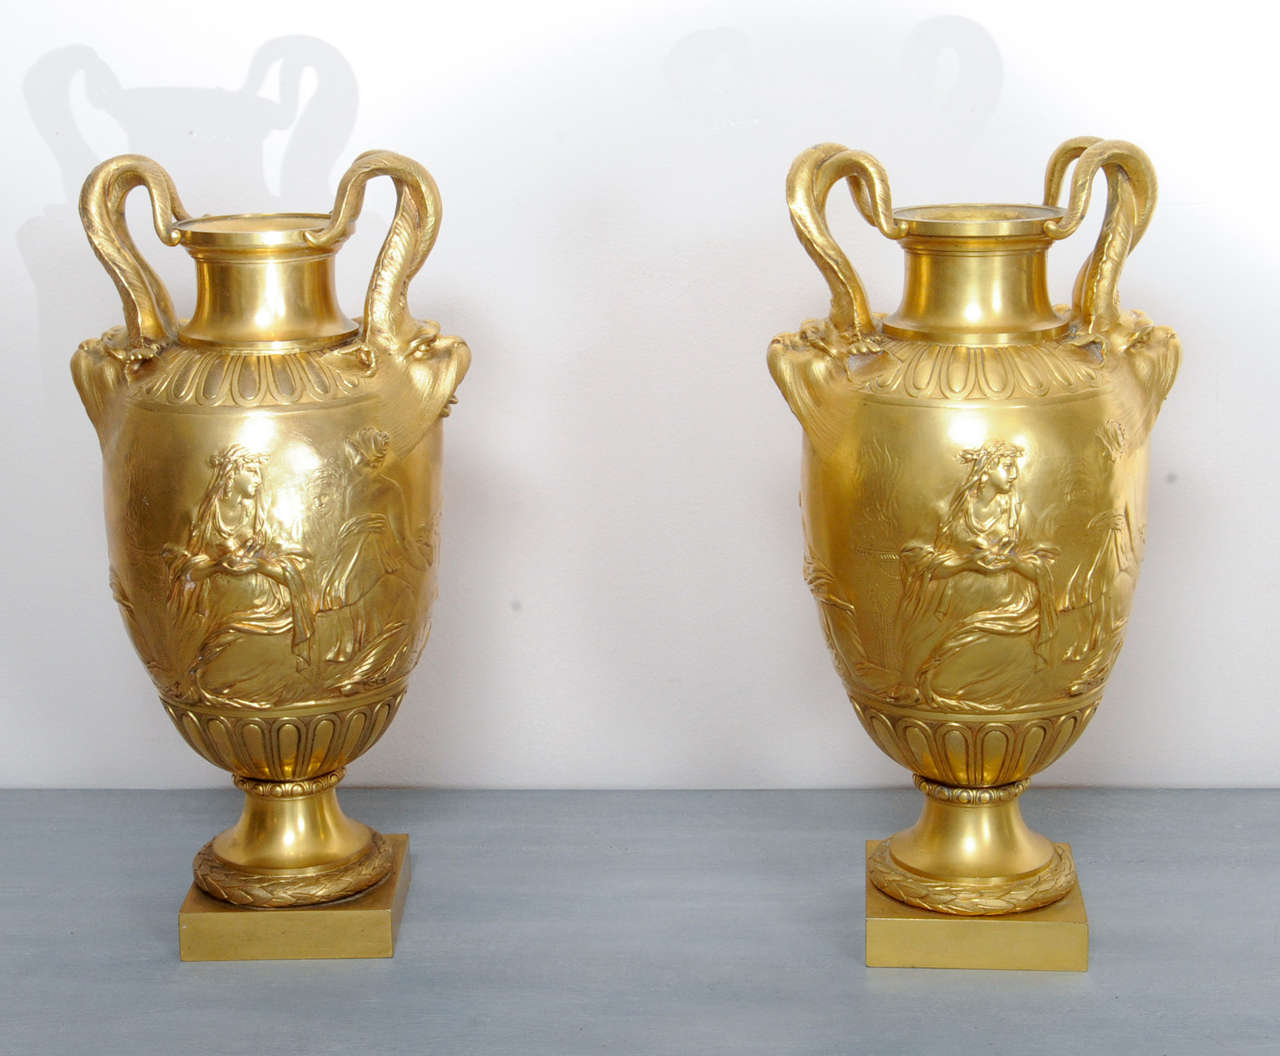 a Pair of Ormolu Ornamental Vases after Clodion and made by Ferdinant Barbedienne, Paris.